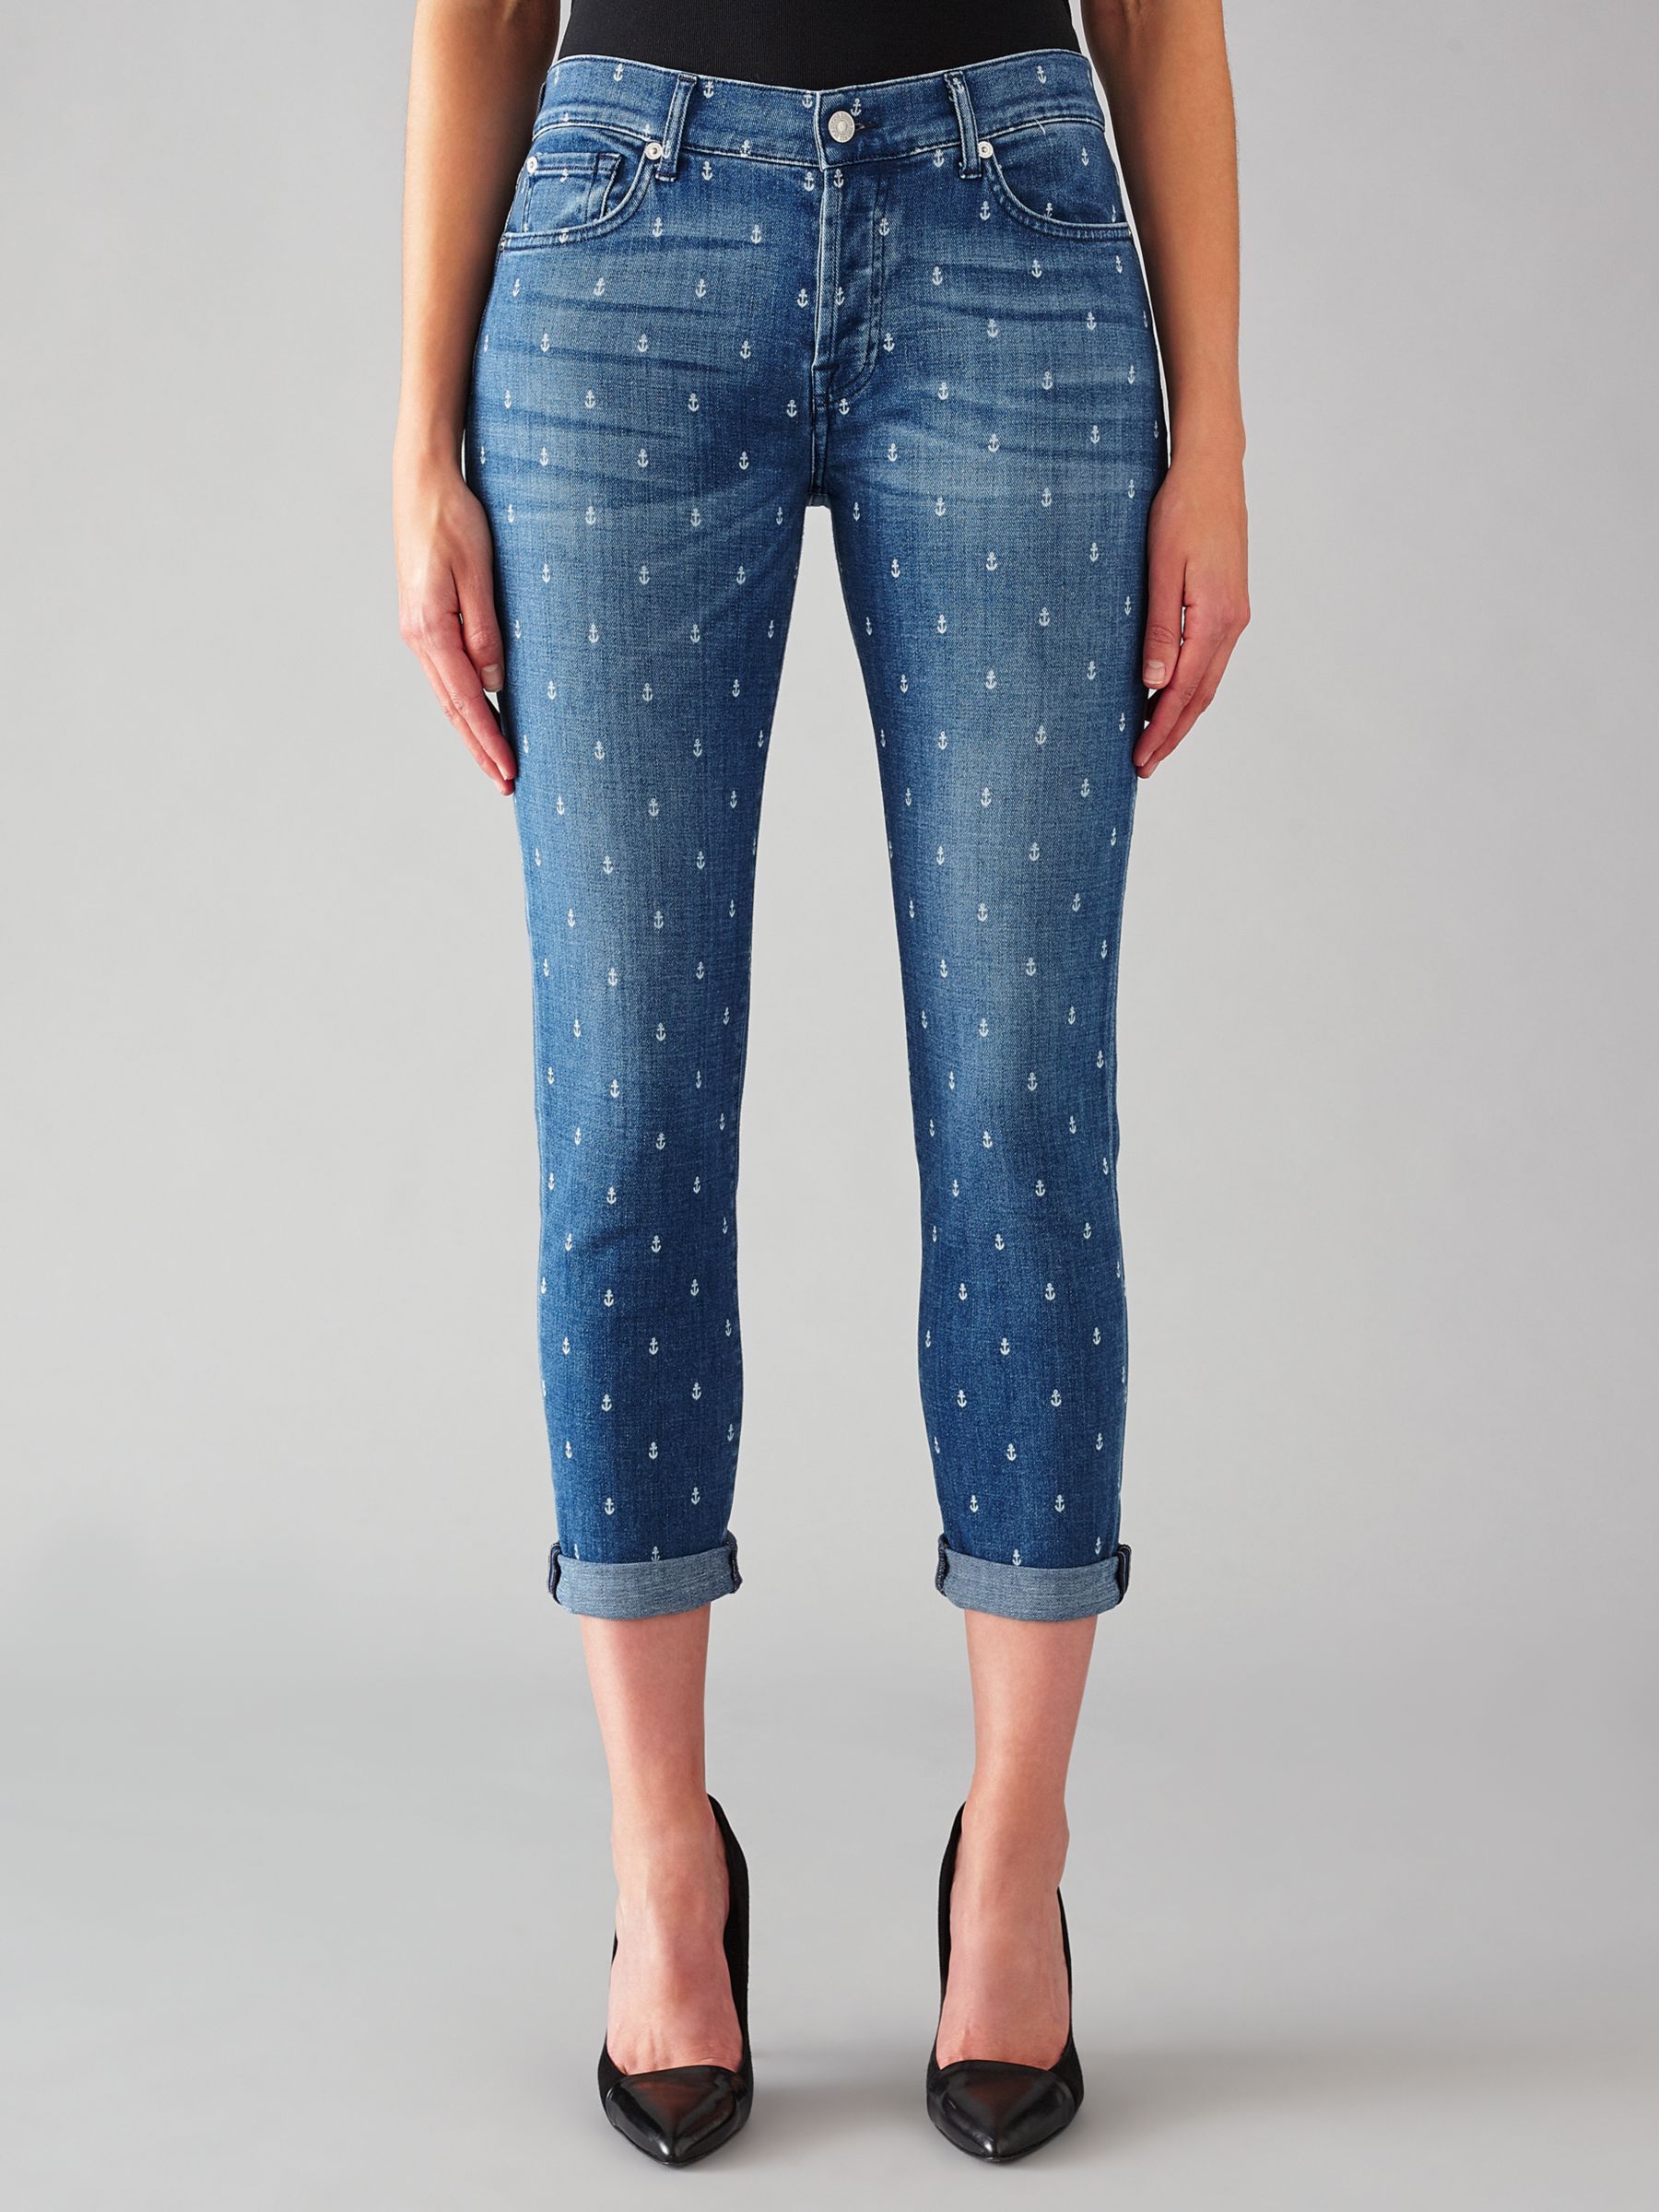 7 for all mankind josefina jeans